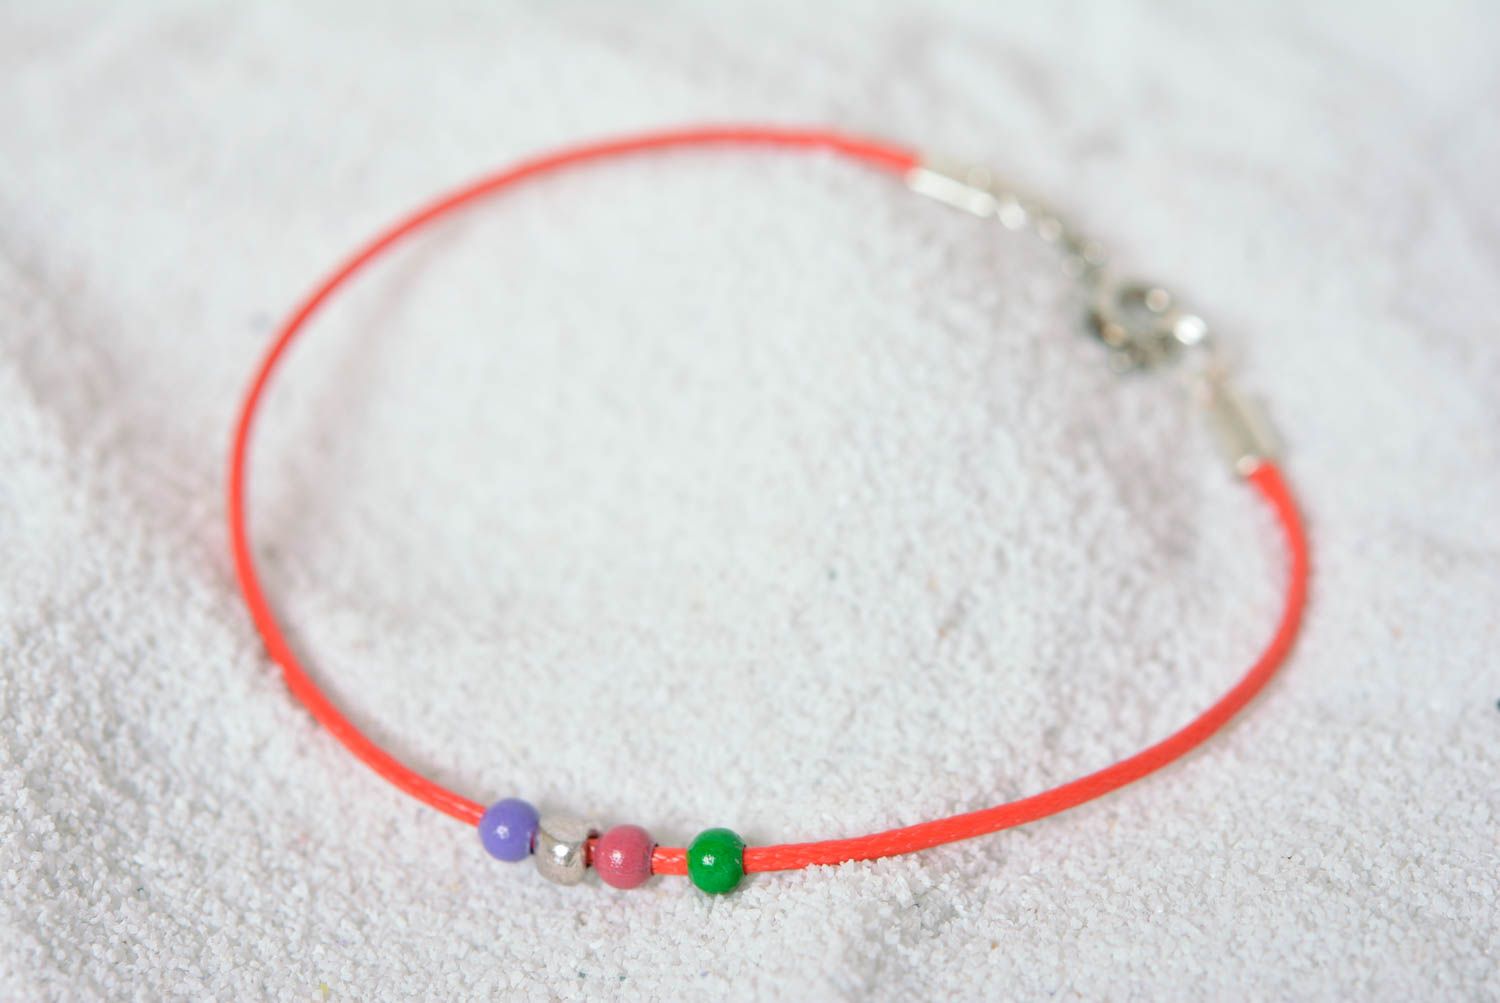 Handmade thin red bracelet cord with blue, green, blue, and silver beads photo 1